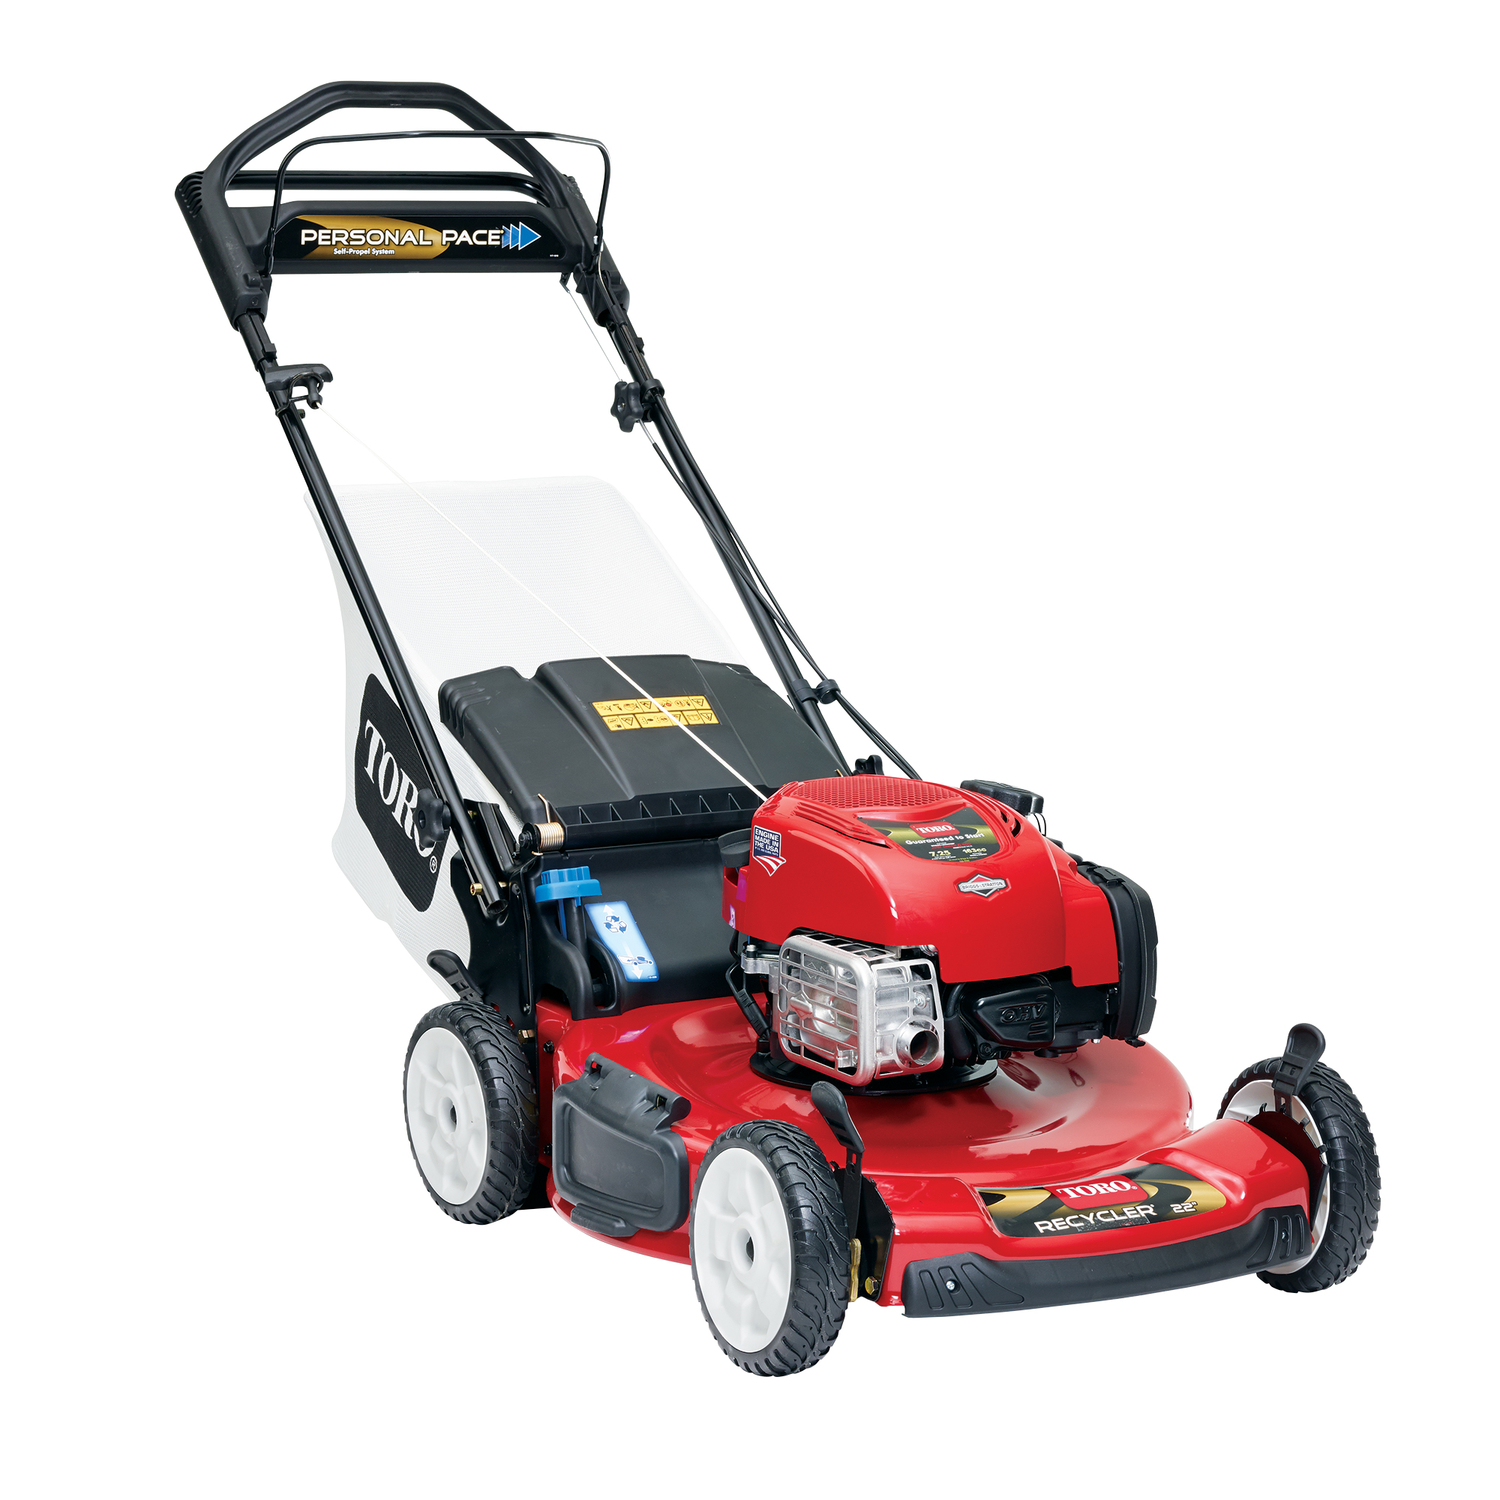 UPC 021038203324 product image for Toro Personal Pace Recycler 22in. Lawn Mower (20332) | upcitemdb.com